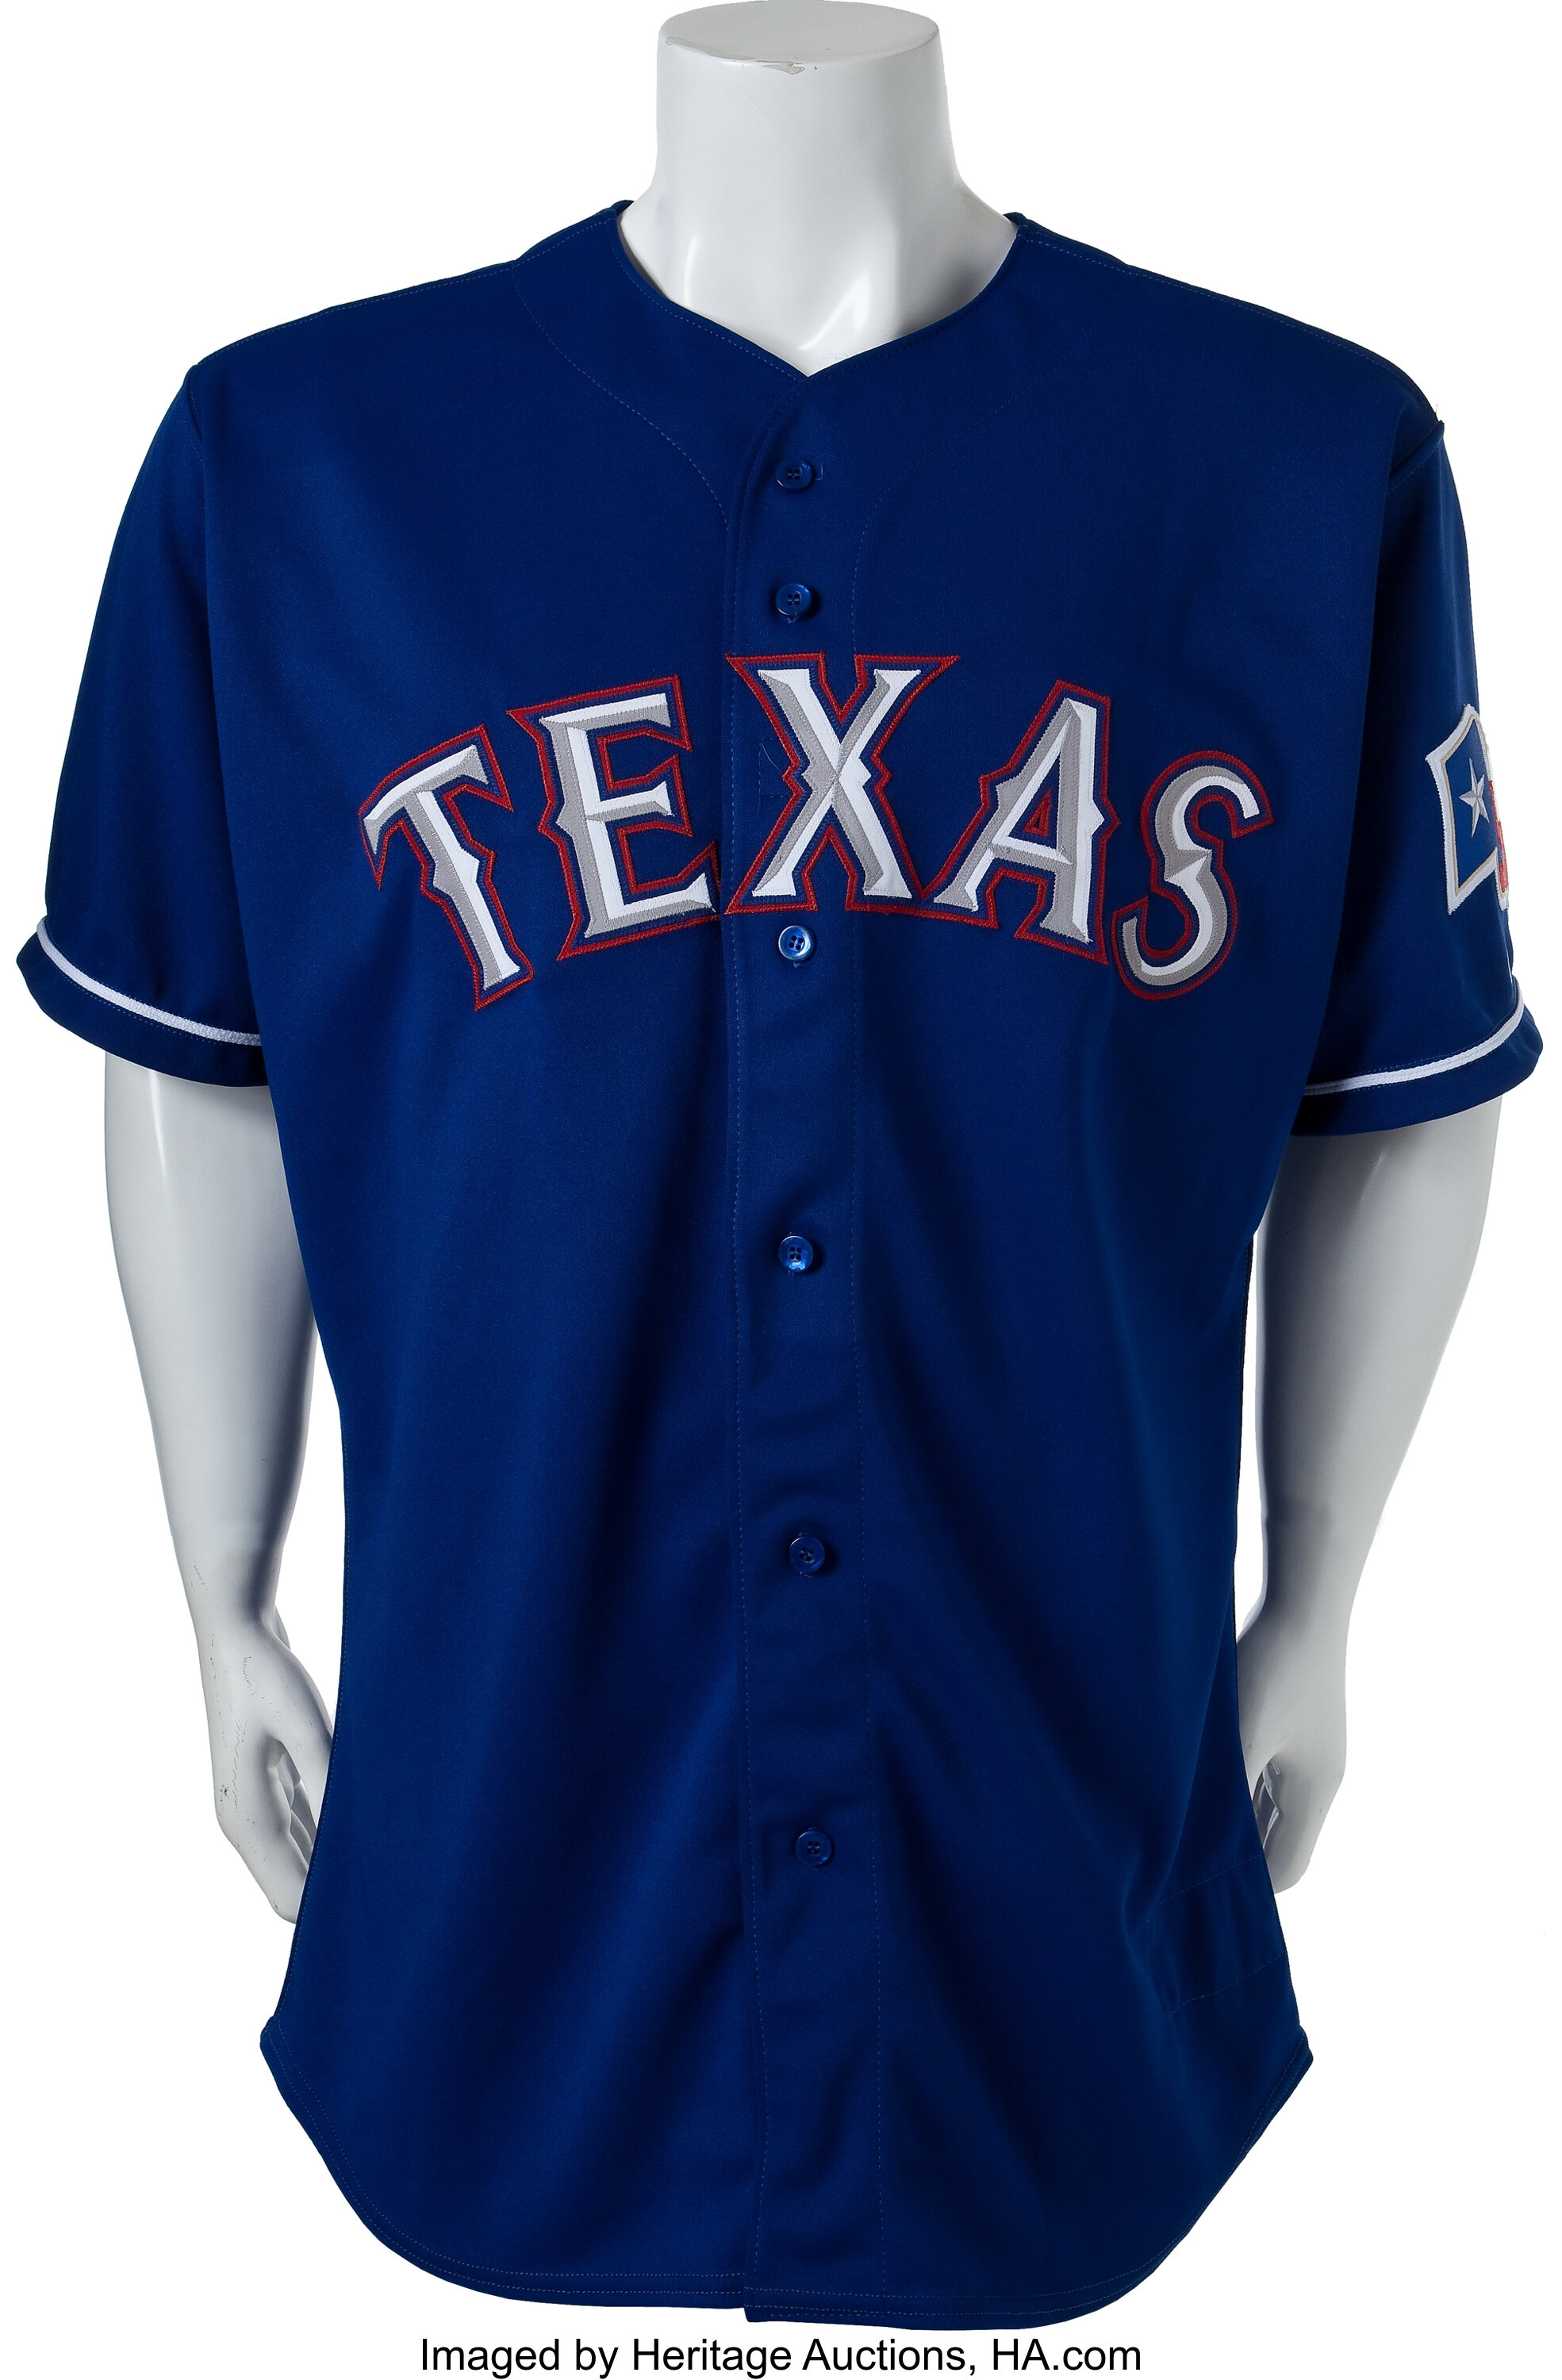 Freshest jerseys in the game. Big ups to the @Texas Rangers for puttin